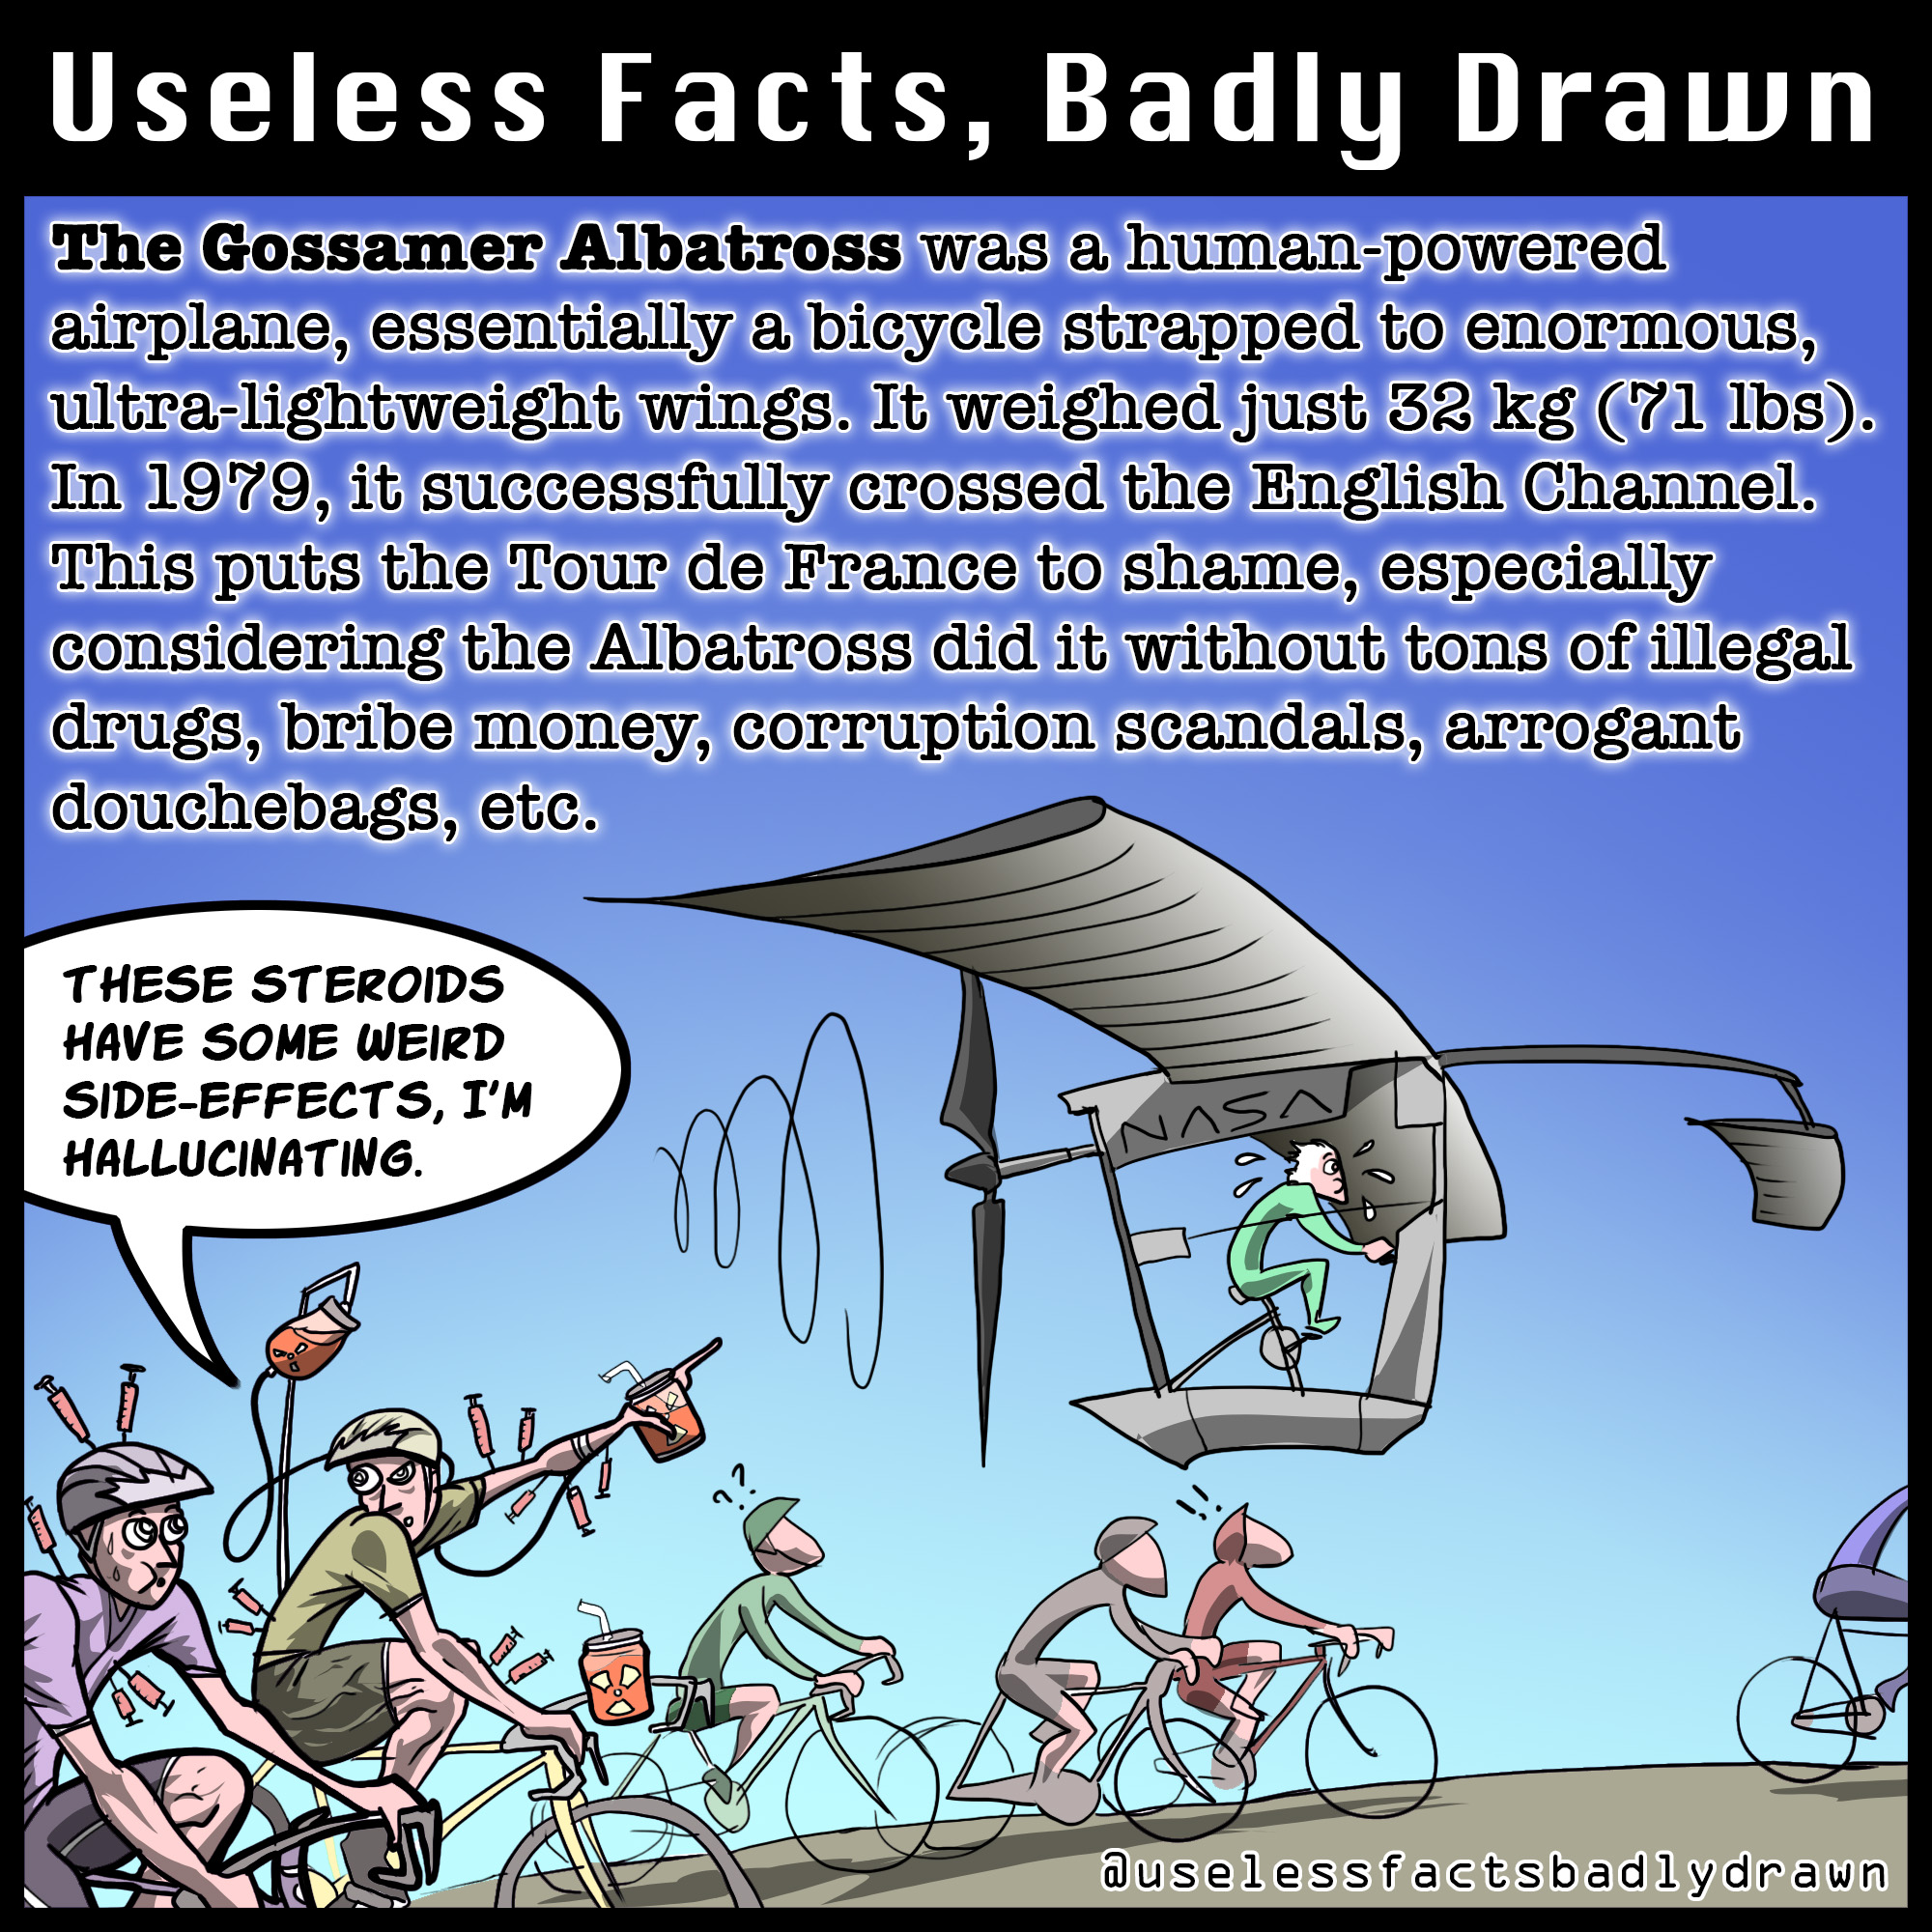 just music radio - Useless Facts, Badly Drawn The Gossamer Albatross was a humanpowered airplane, essentially a bicycle strapped to enormous, ultralightweight wings. It weighed just 32 kg 71 lbs. In 1979, it successfully crossed the English Channel. This 